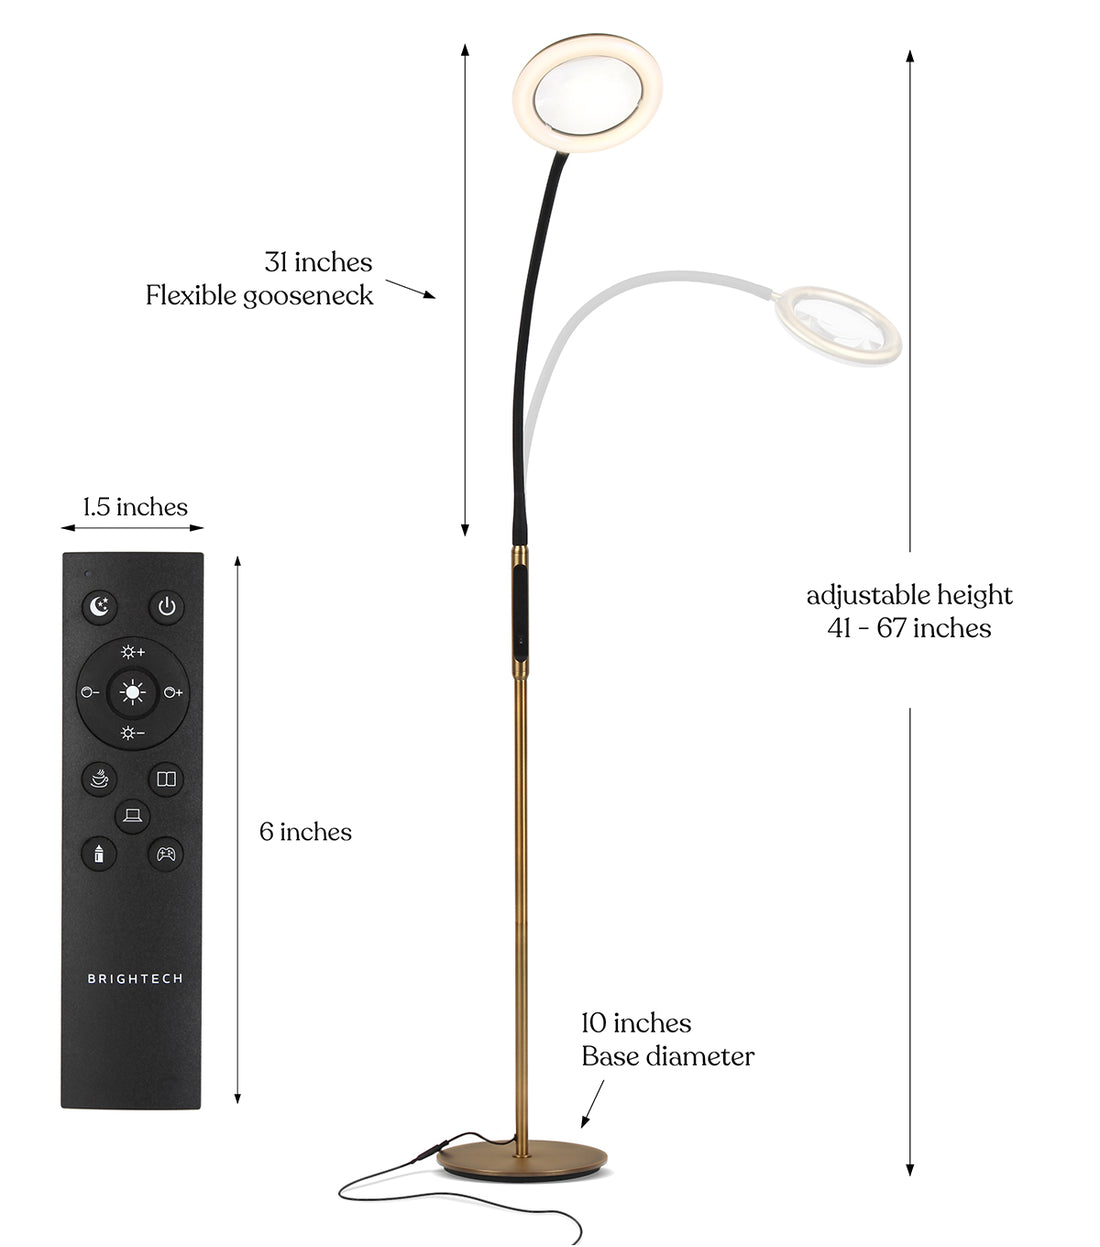 Brightech LightView Remote - Remote Controlled Magnifying Floor Lamp - Dimmable, Hands Free Magnifier with Bright LED Light for Reading - Flexible Gooseneck Holds Position - Standing Mag Lamp